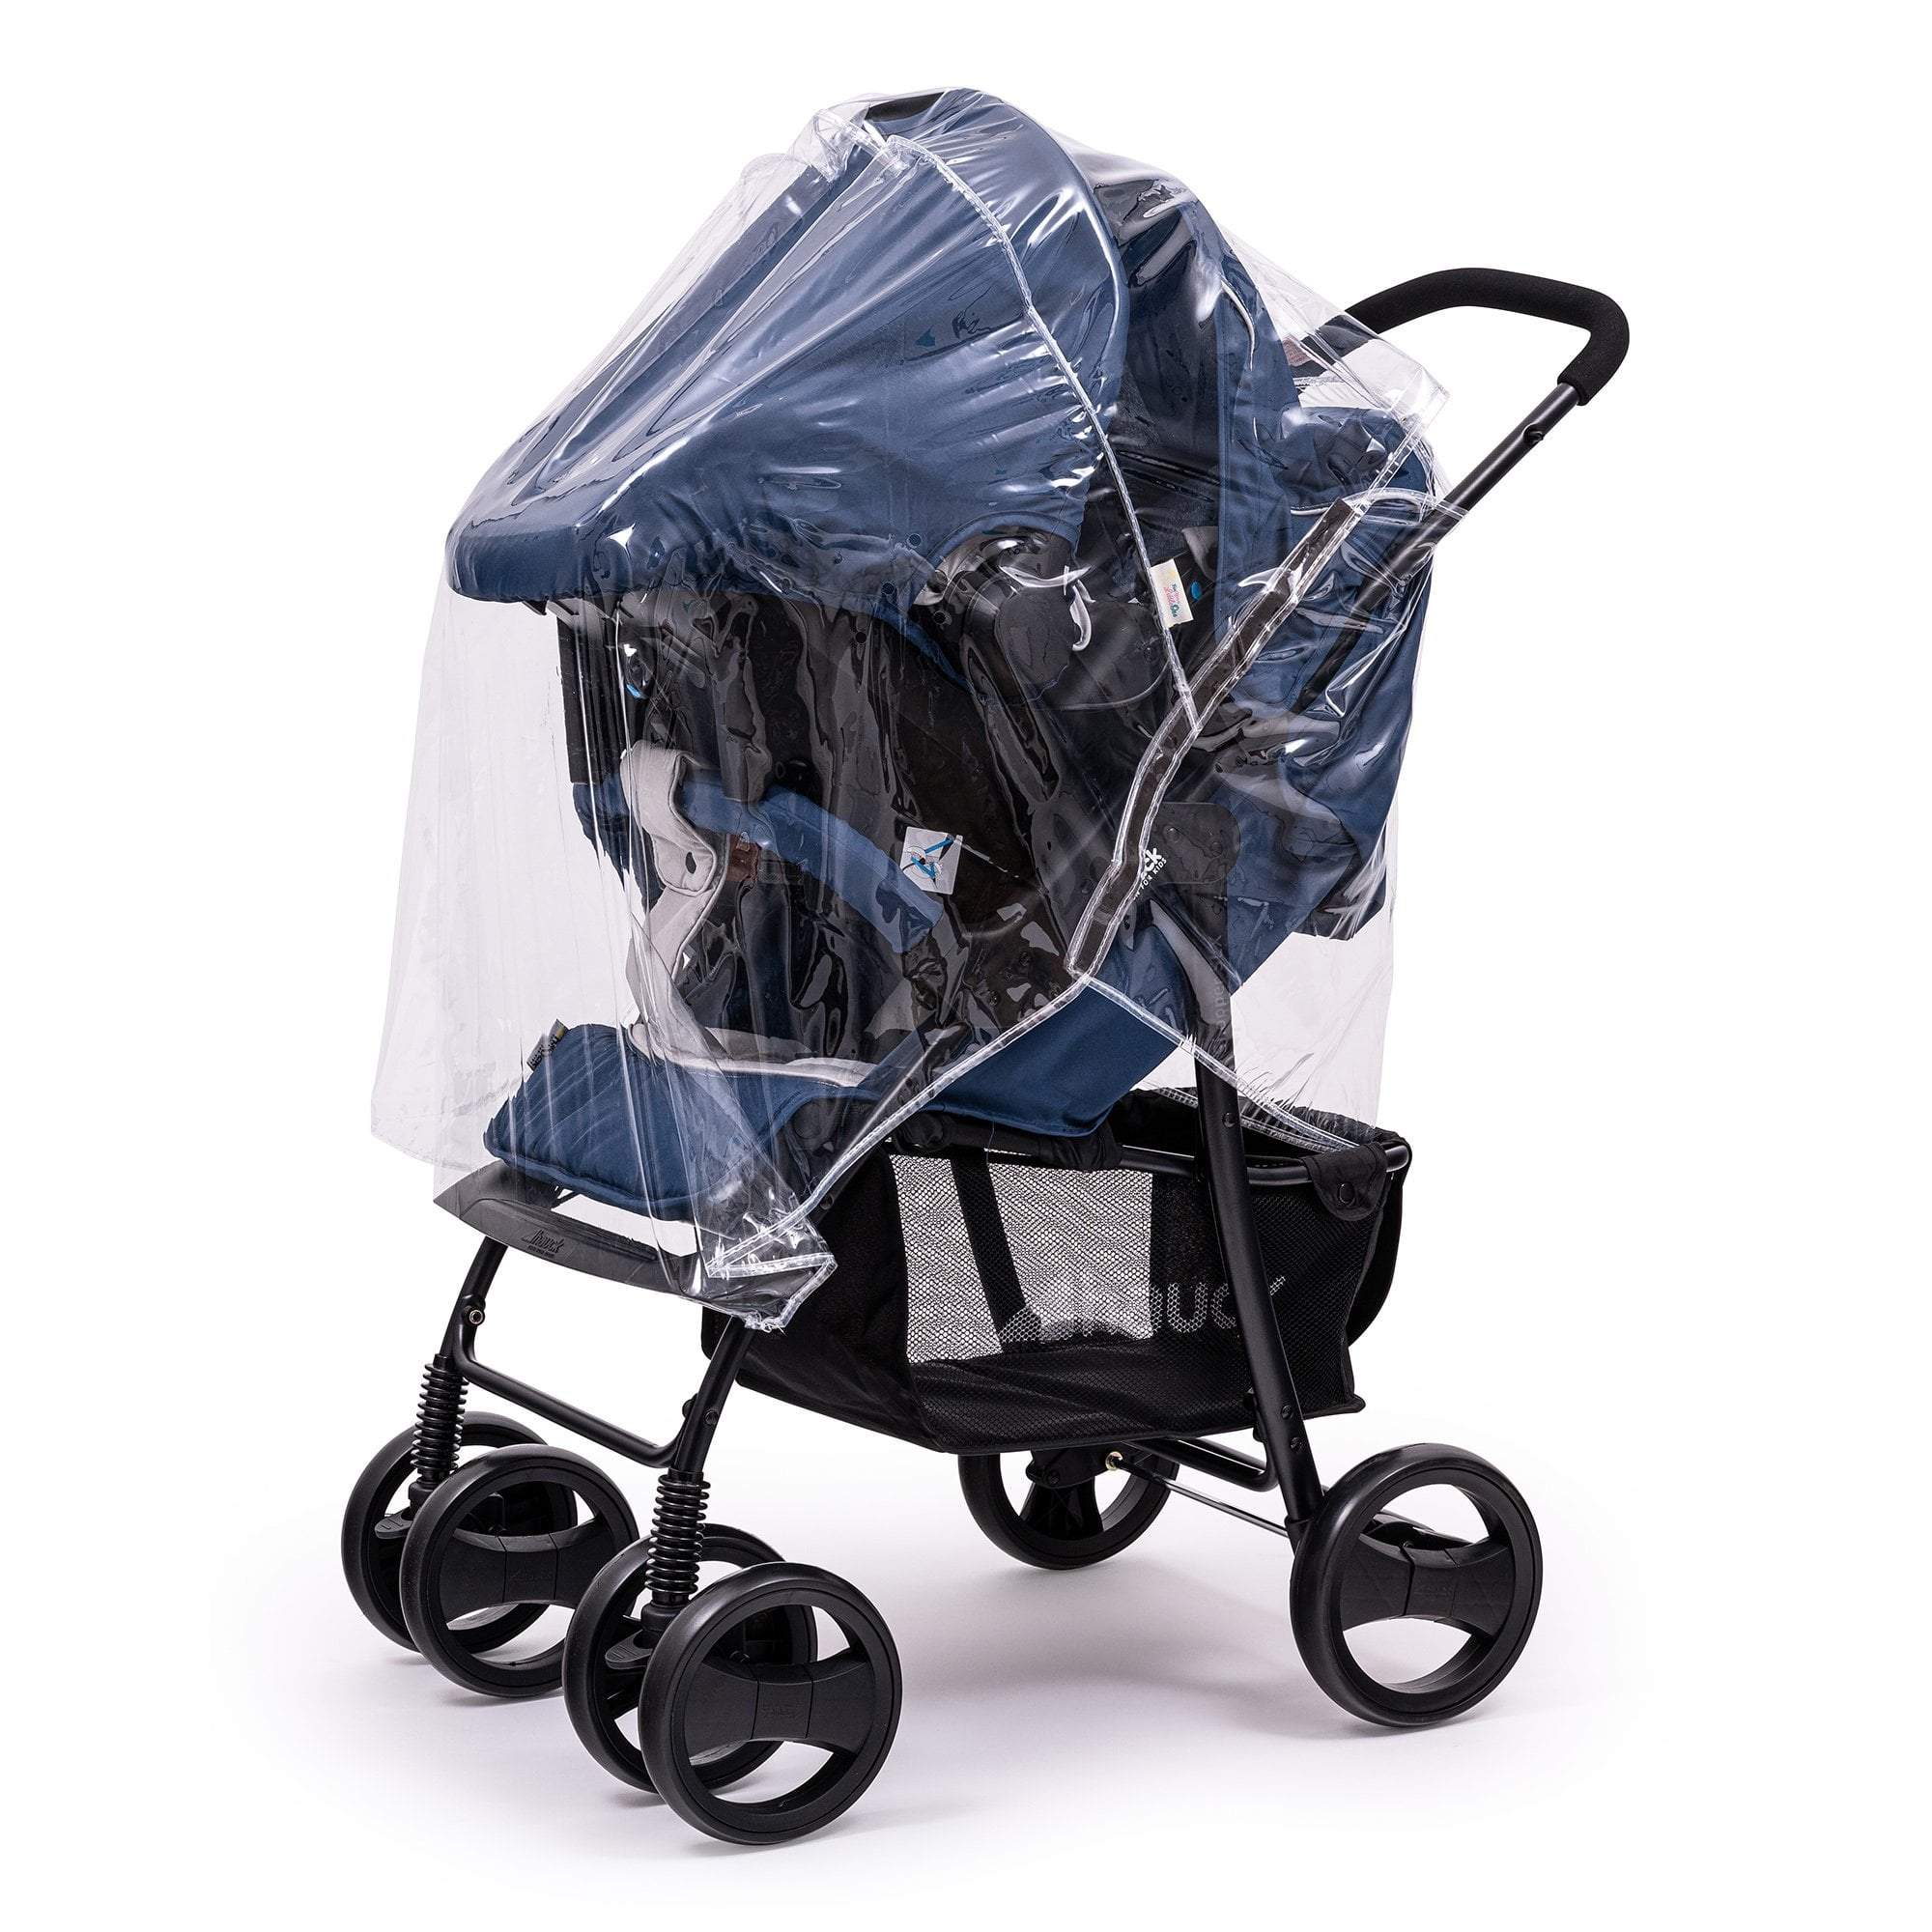 Travel System Raincover Compatible with Mee-Go - Fits All Models - For Your Little One